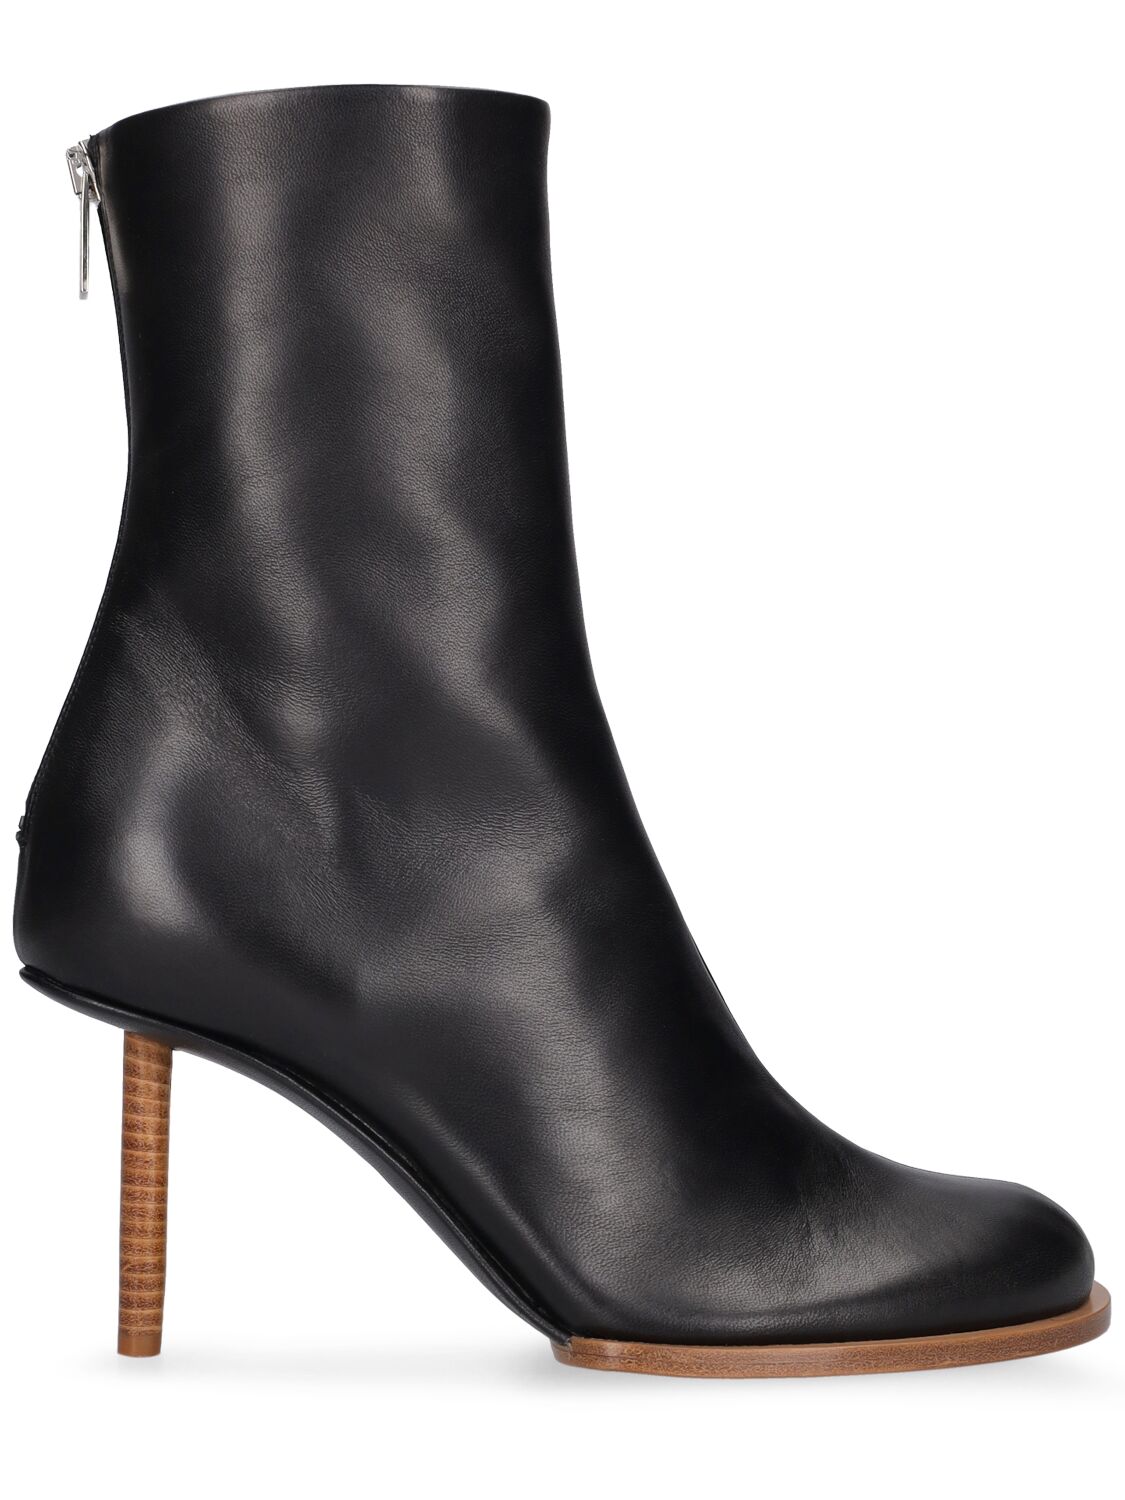 Mm Leather Ankle Boots - JACQUEMUS - Modalova